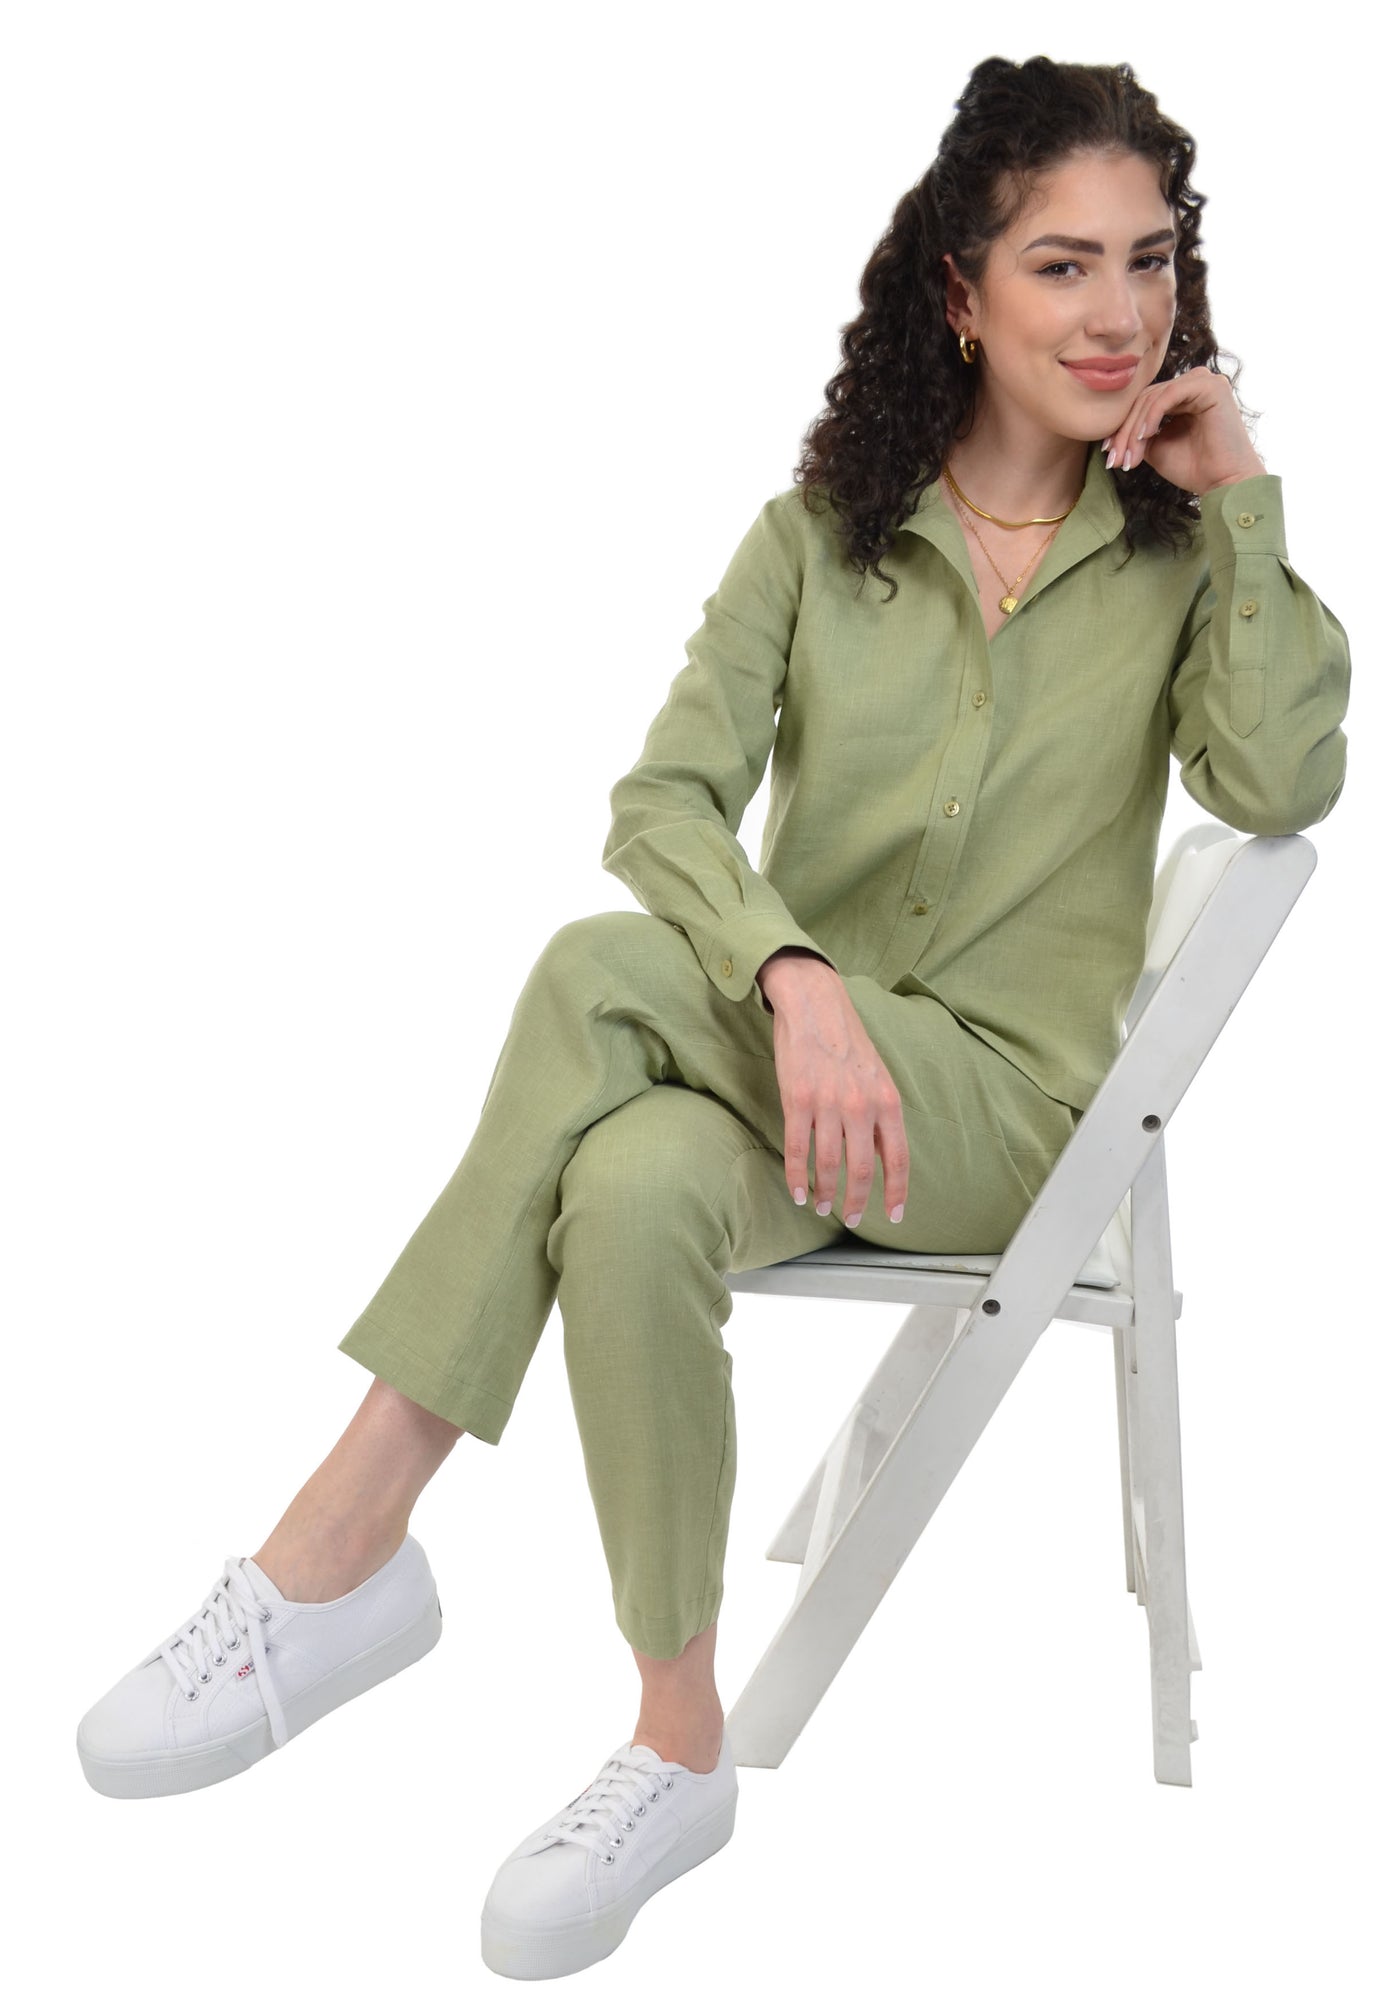 Relaxed Ankle Length Laundered Linen Pants with Pockets and Draw String